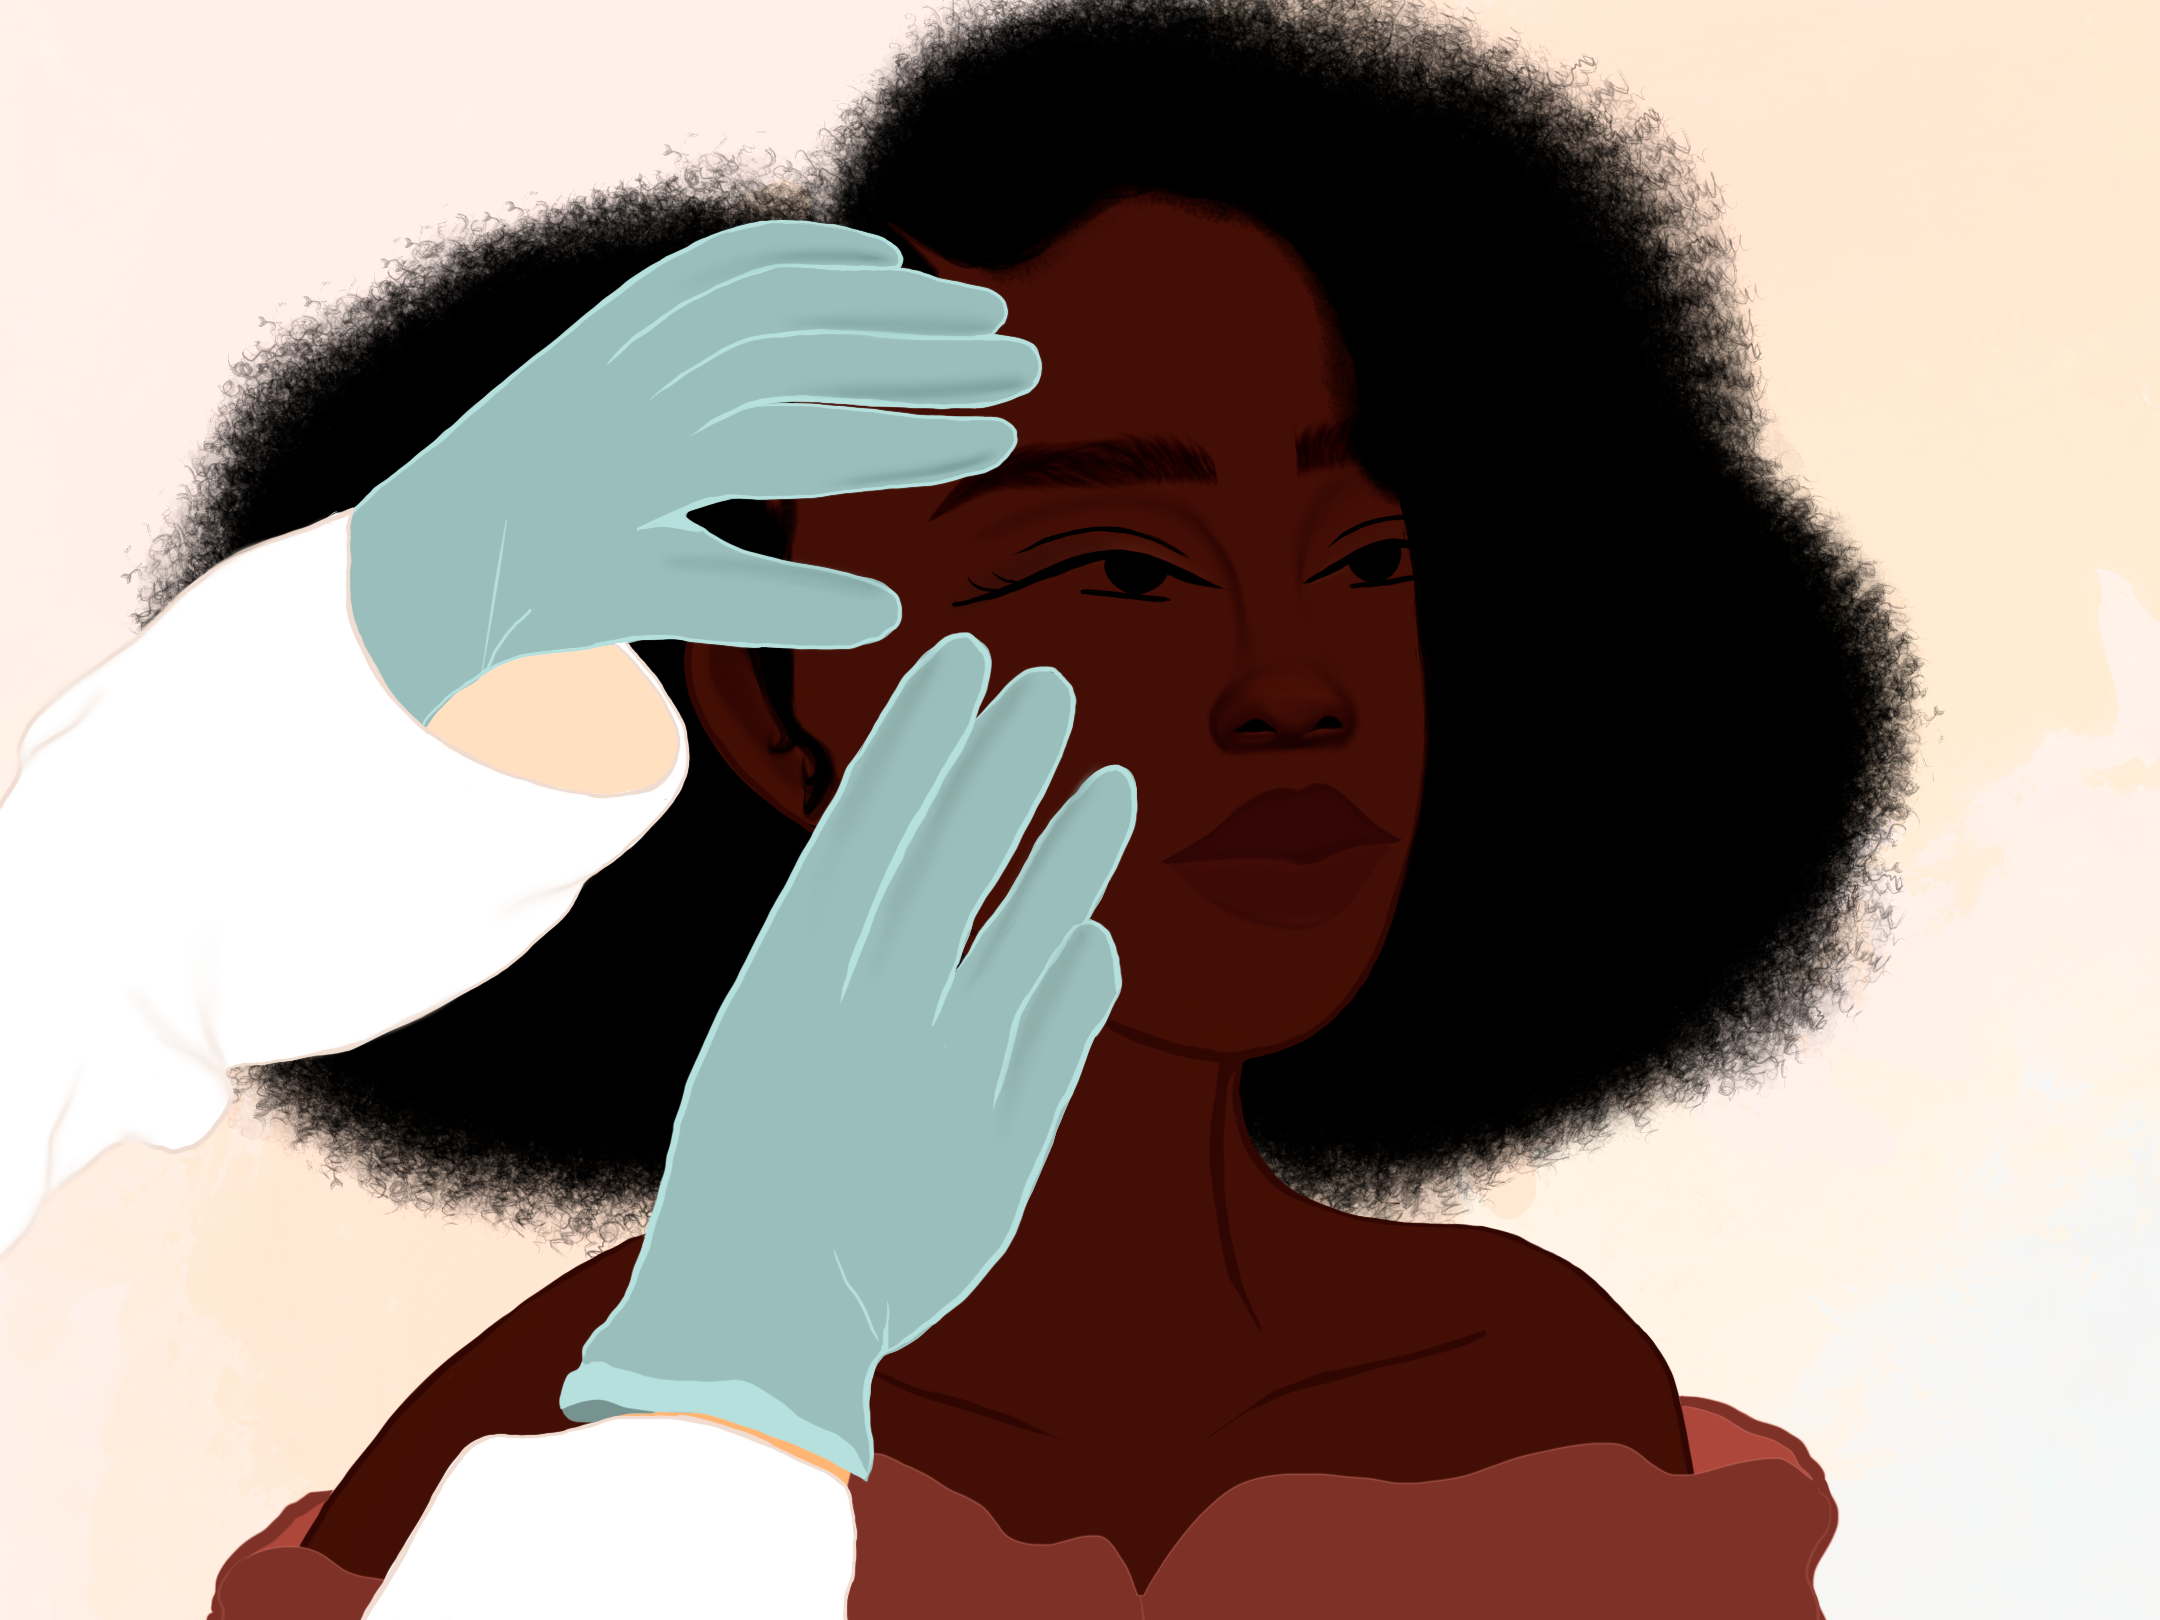 (German) dermatology and its problems with dark skin